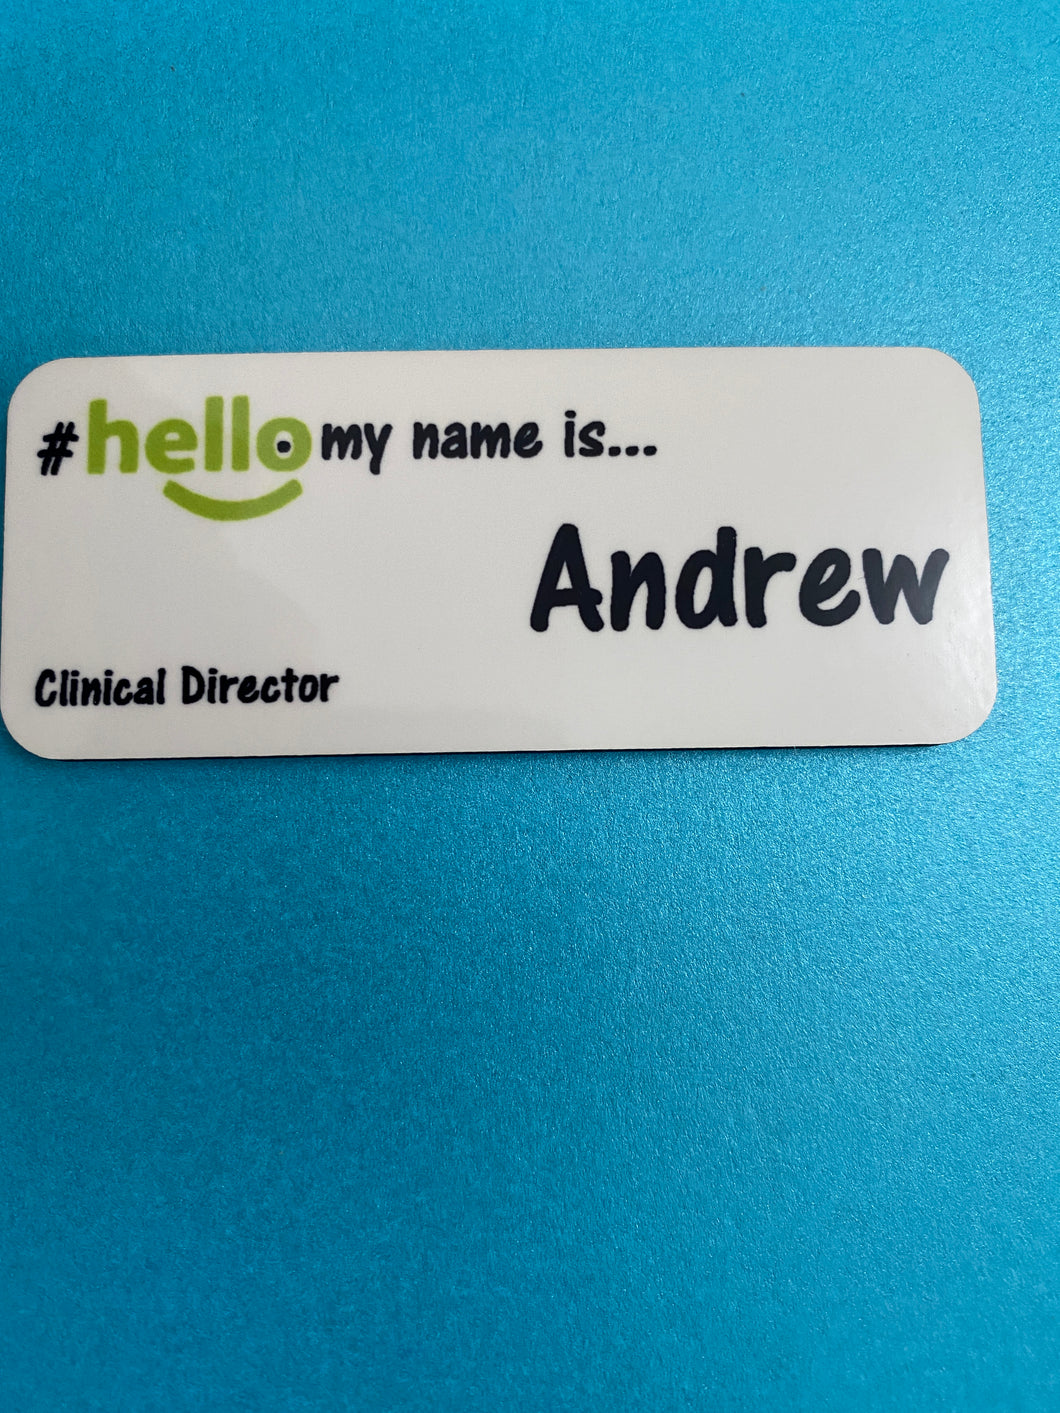 Original Name badges # hello my name is...